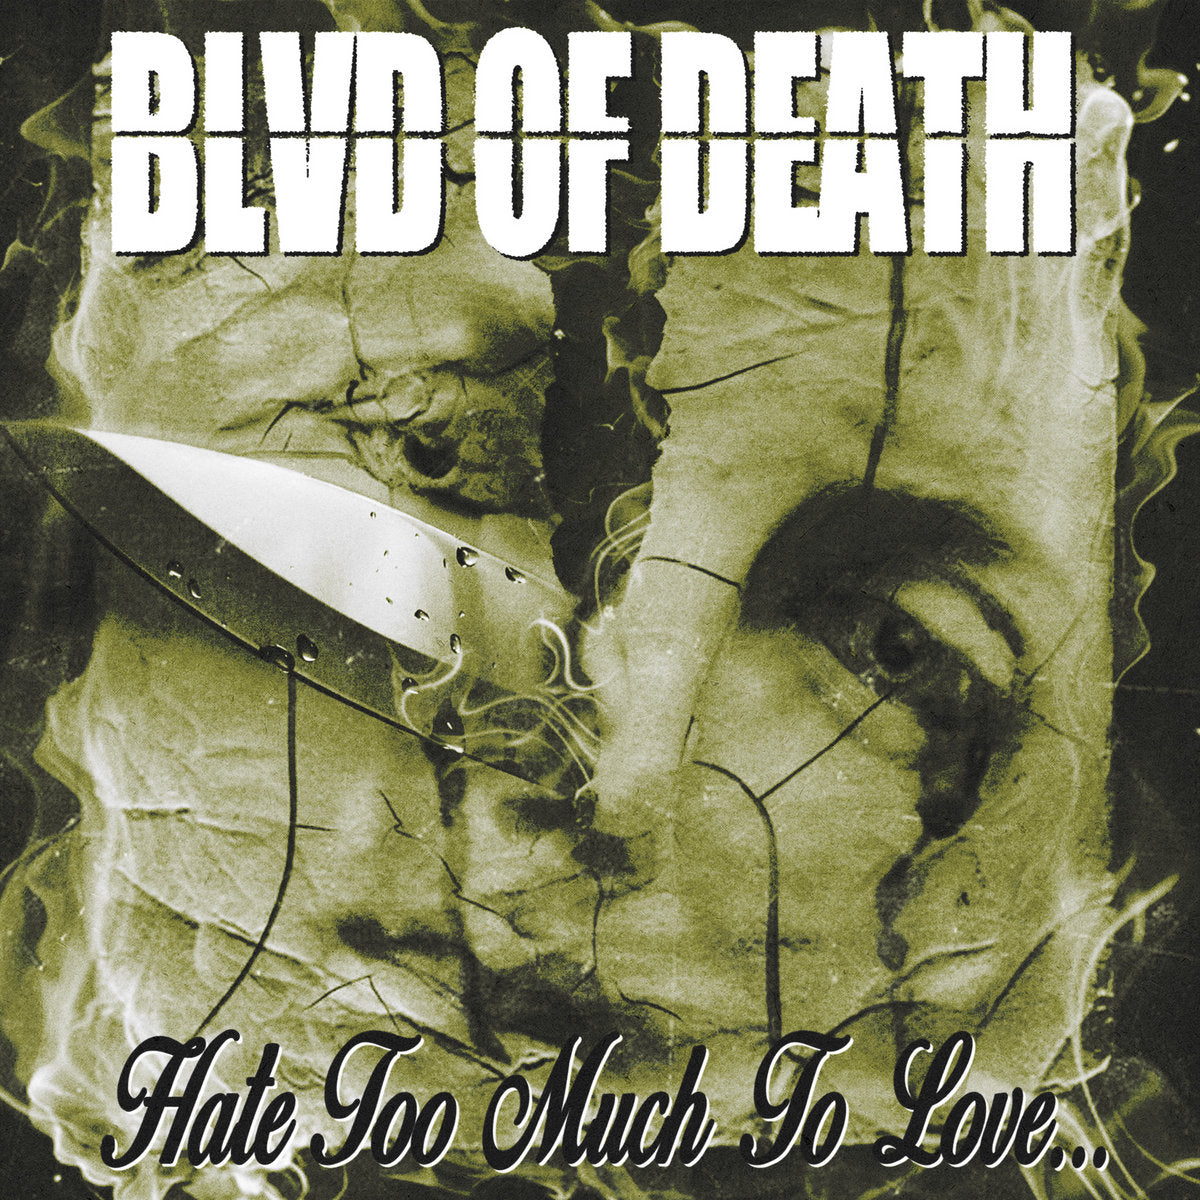 Blvd of Death - 'Hate Too Much To Love...'